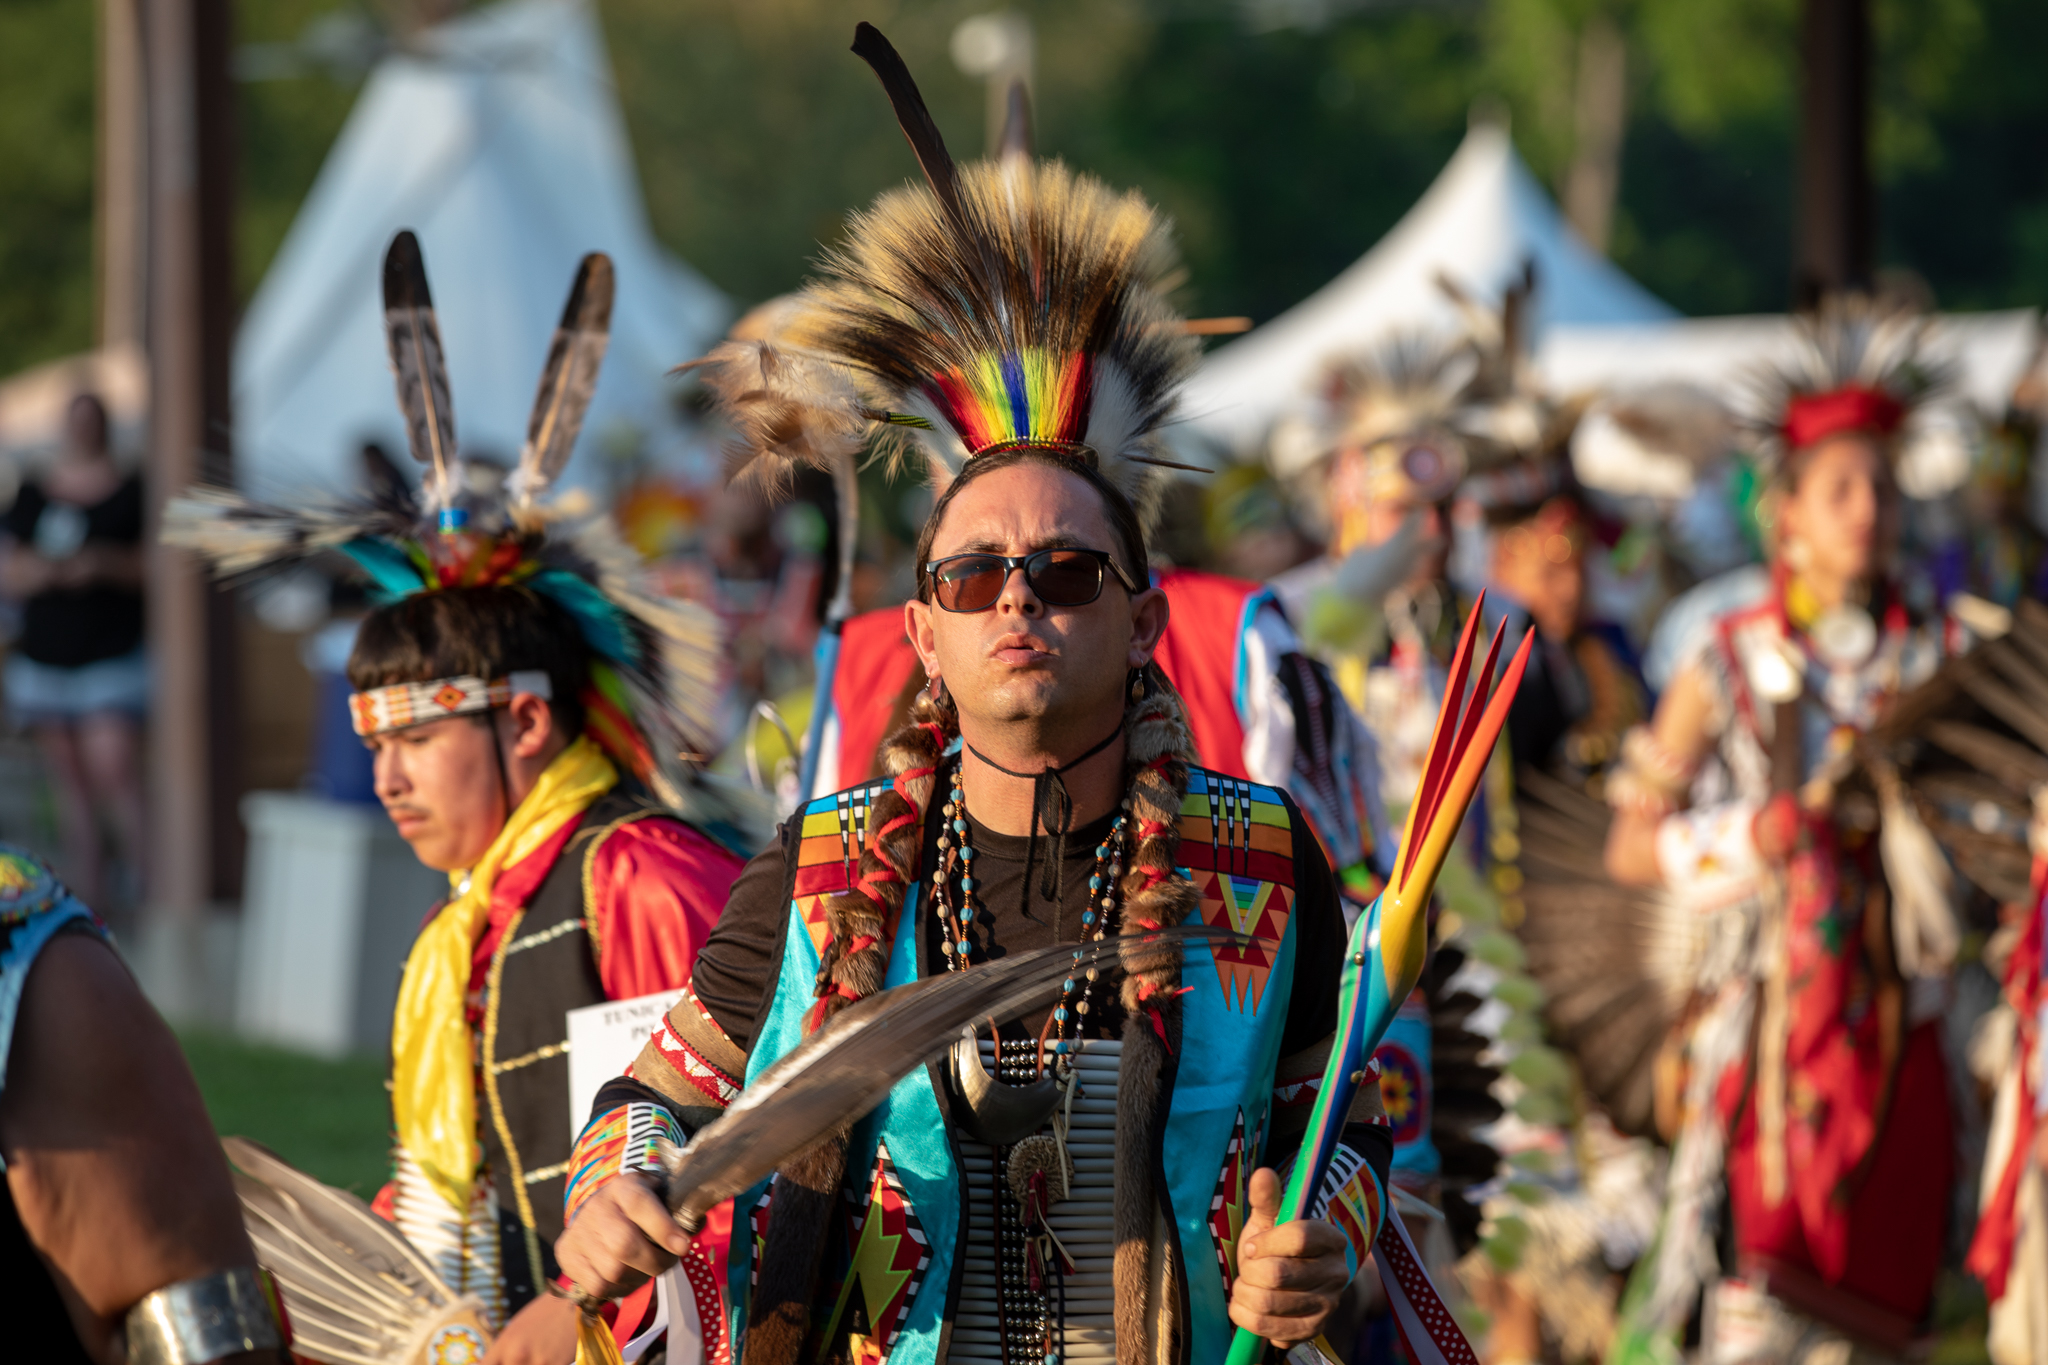 Tunica-Biloxi Tribe to host first Pow Wow since before pandemic – Interview with Ryan Lopez